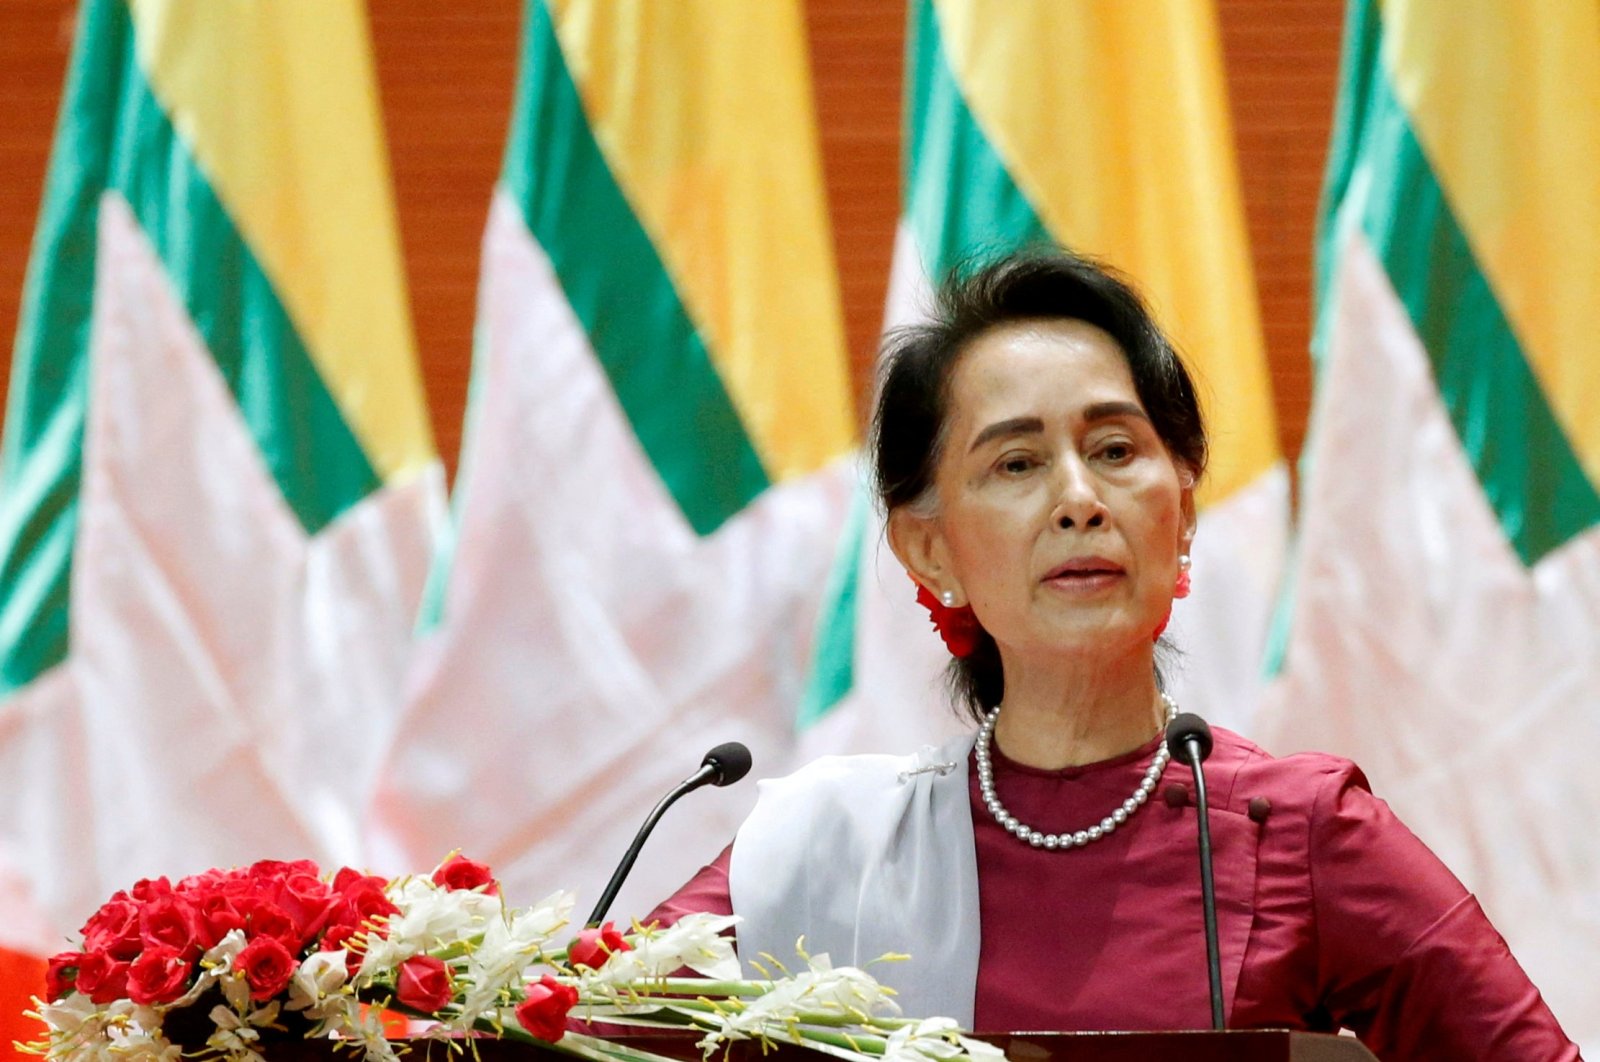 Myanmar State Counselor Aung San Suu Kyi delivers a speech to the nation over the Rakhine and Rohingya situation, in Naypyitaw, Myanmar, Sept. 19, 2017. (Reuters File Photo)